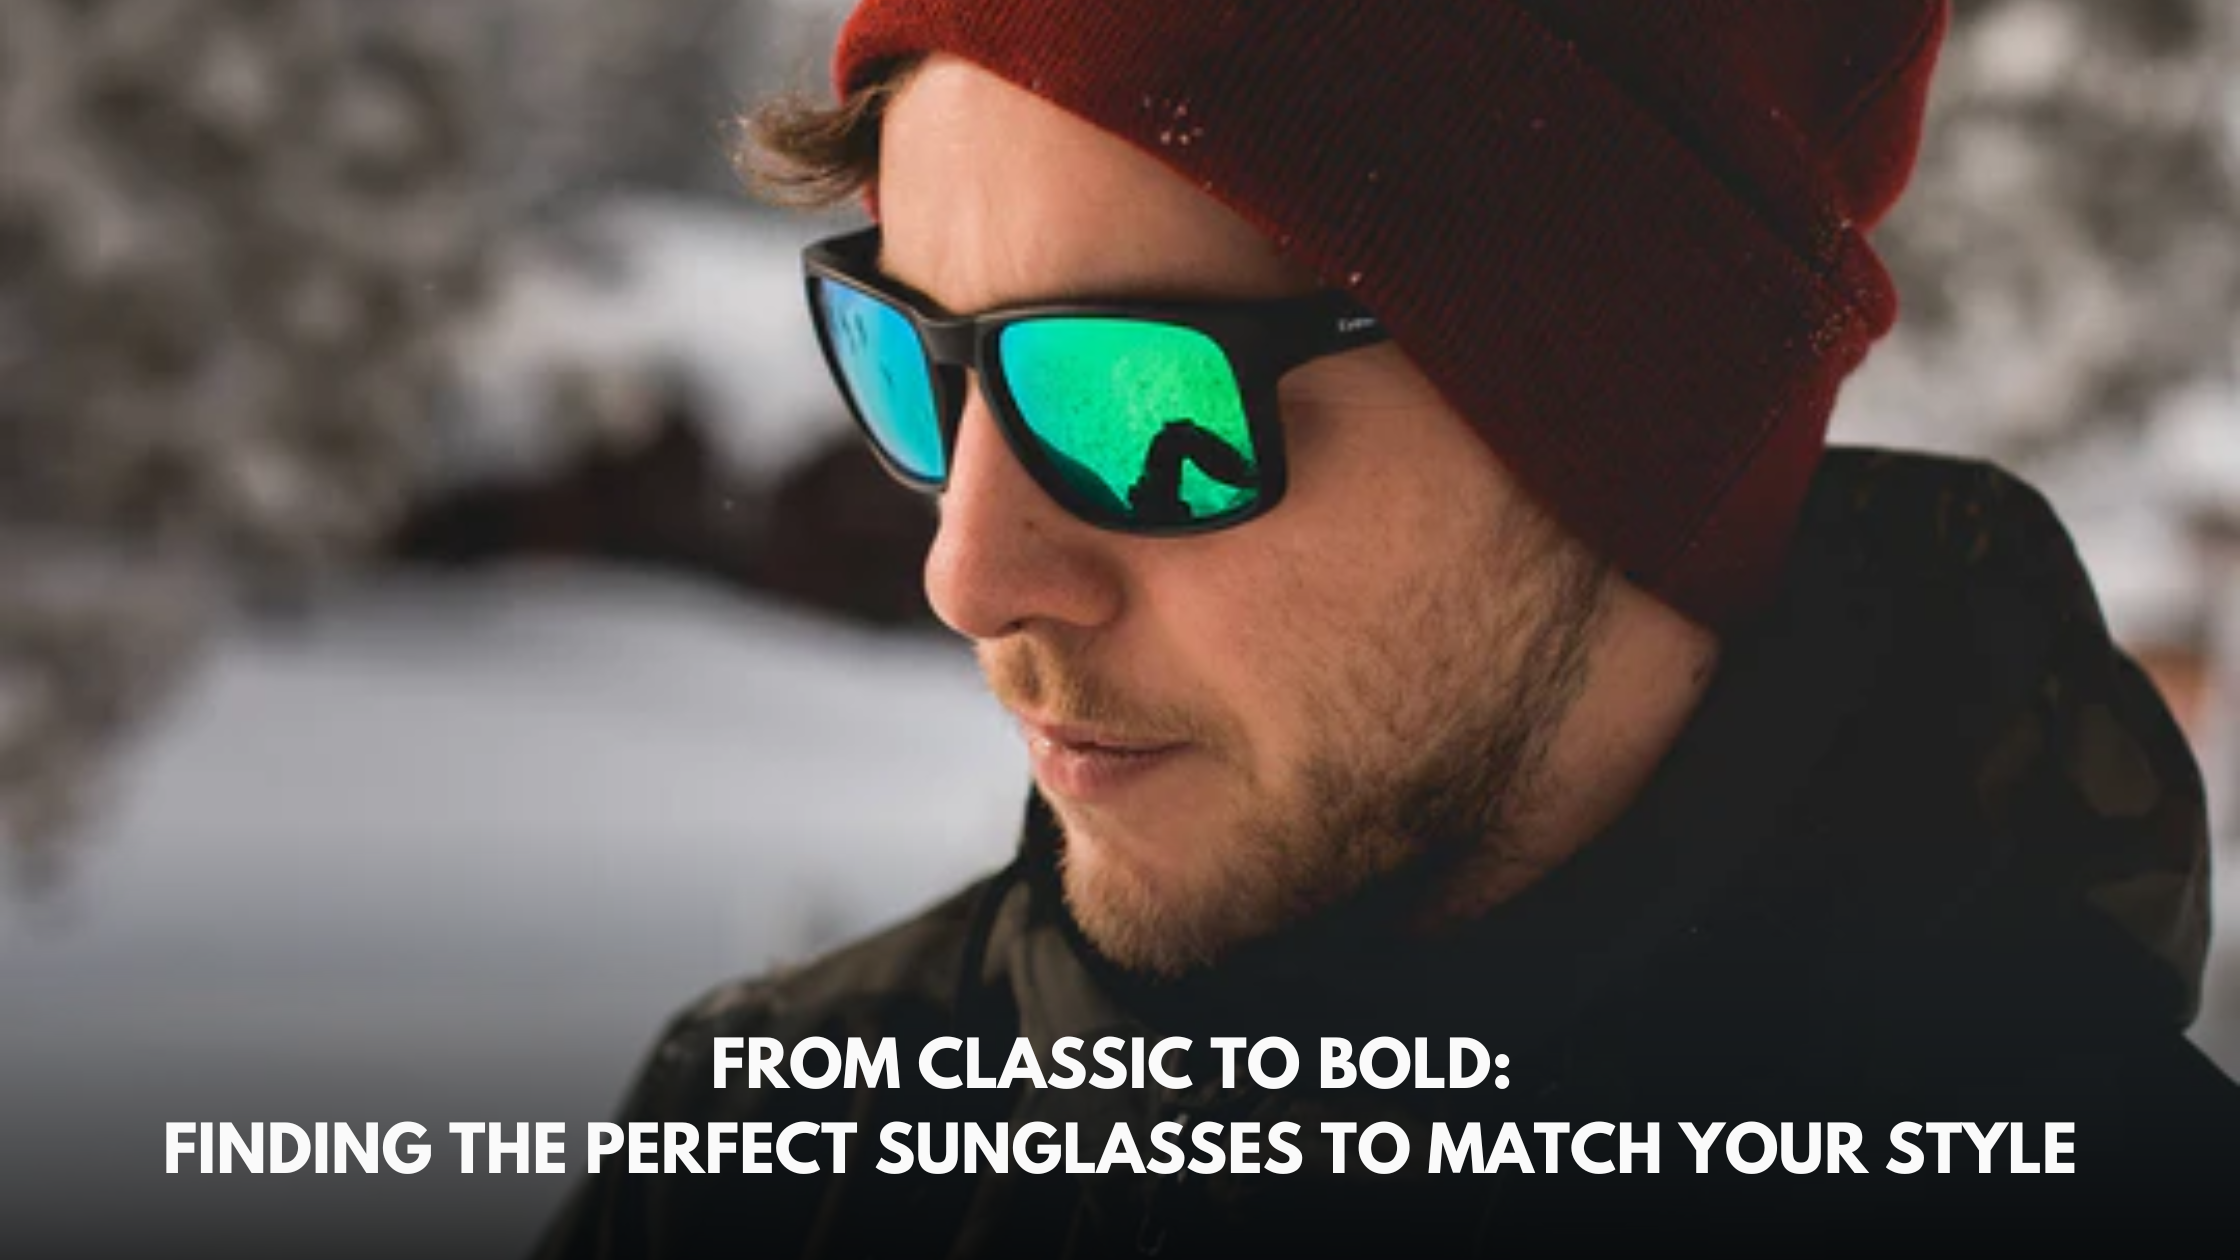 From Classic to Bold: Finding the Perfect Sunglasses to Match Your Style